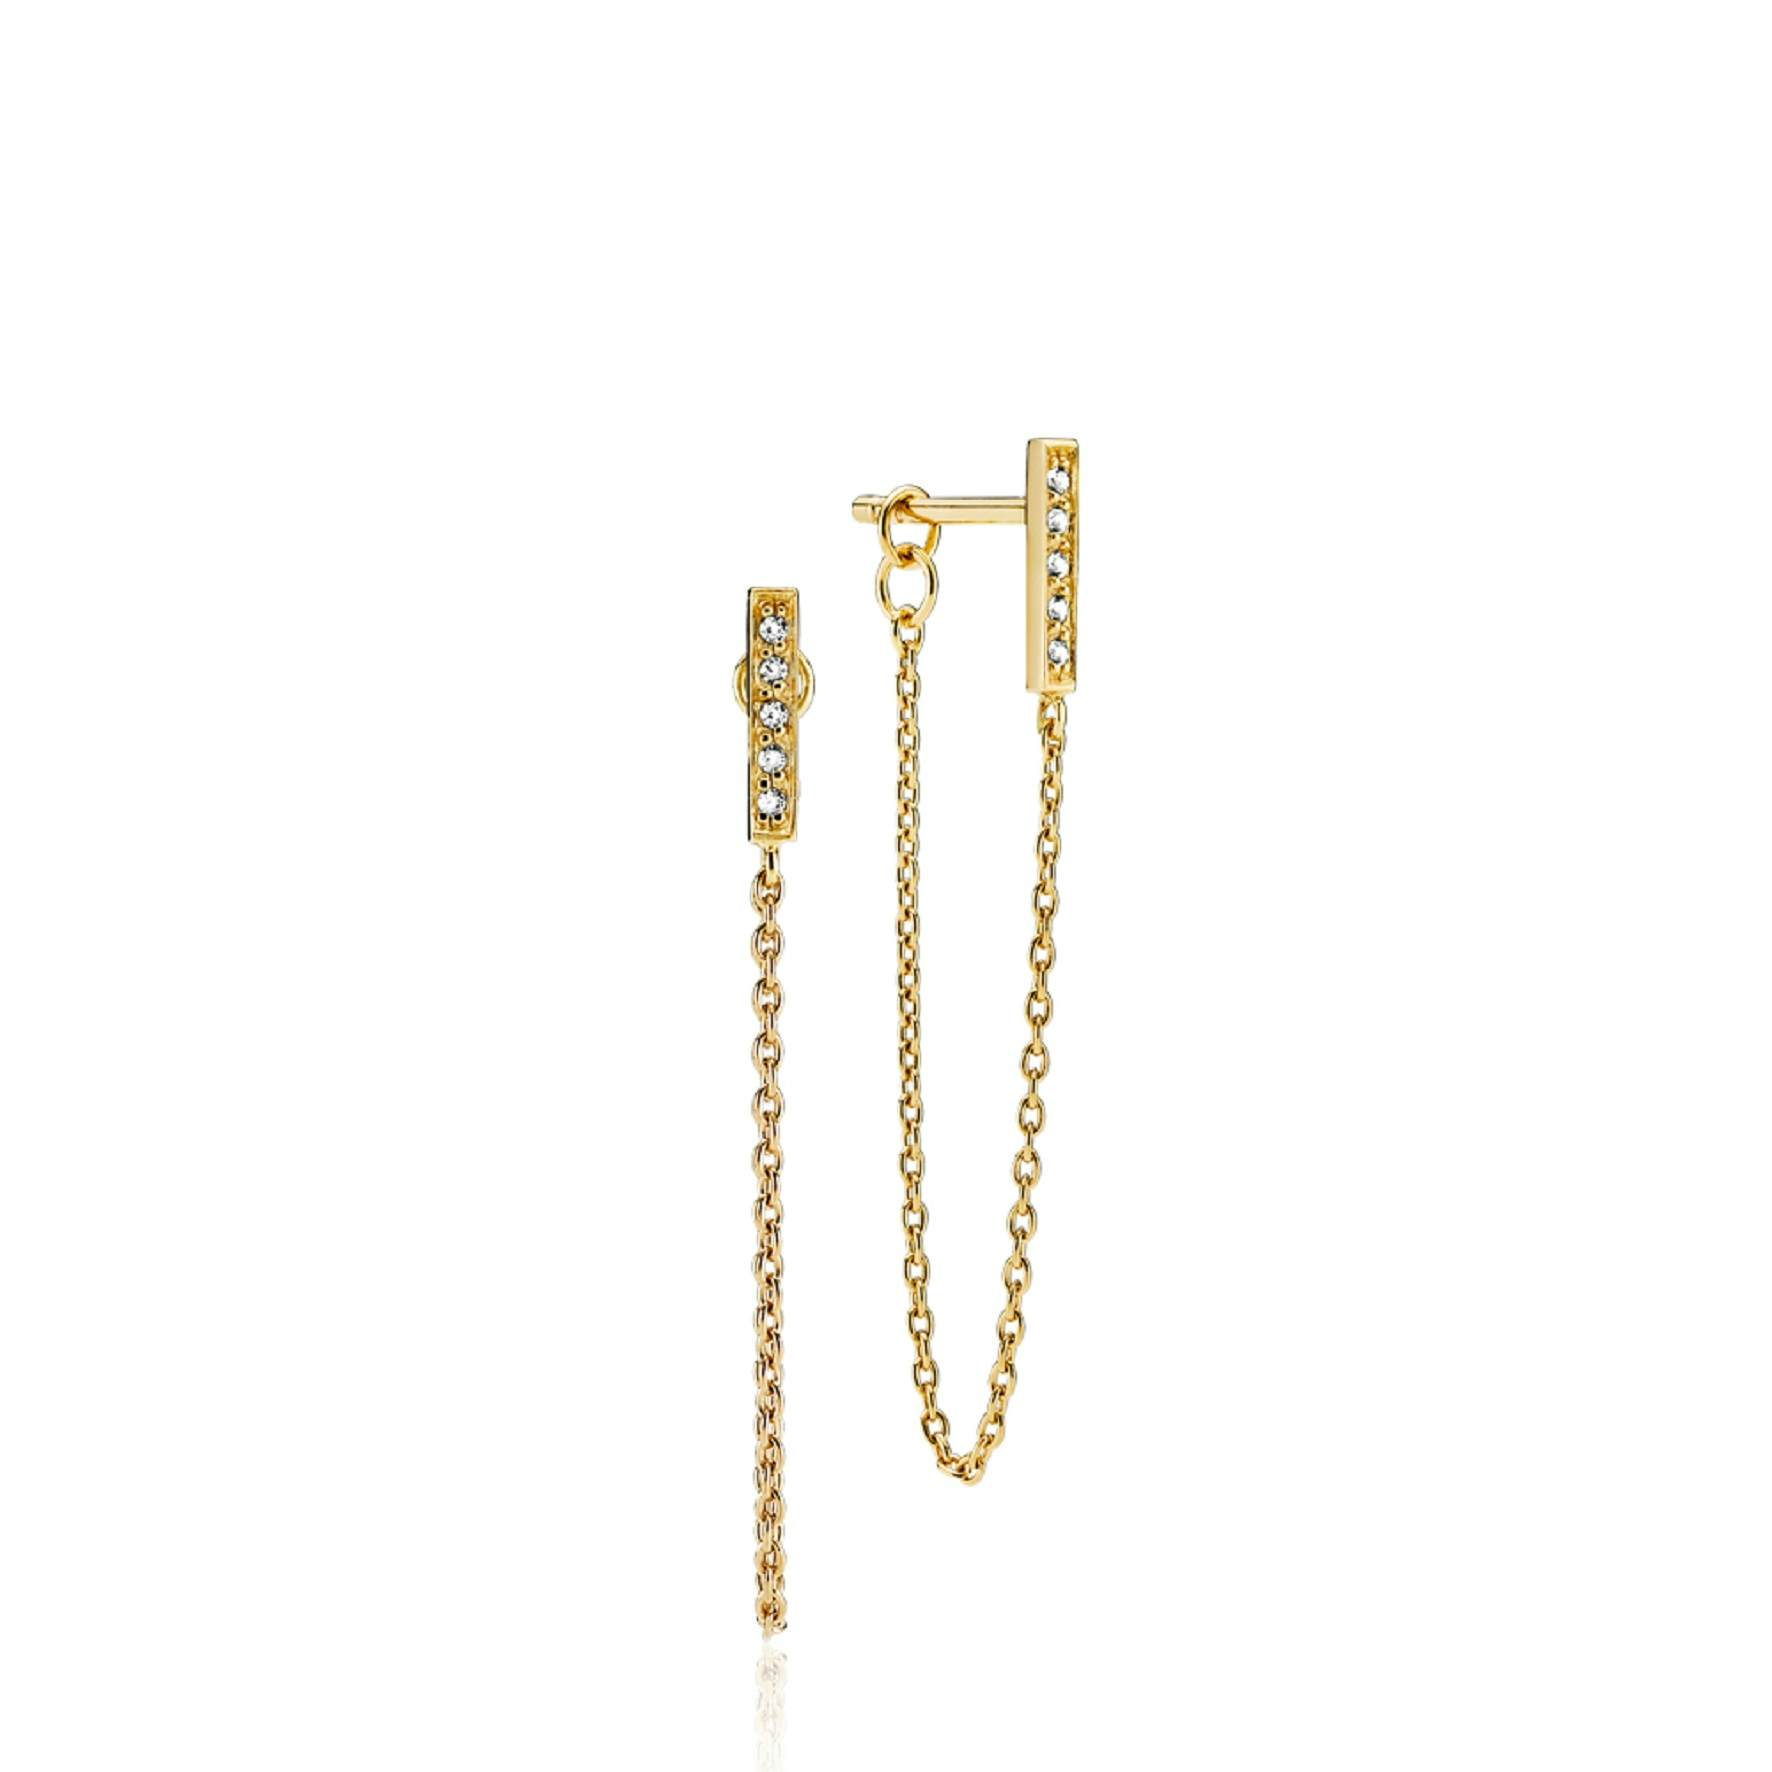 Brilliant Earchains from Sistie in Goldplated-Silver Sterling 925